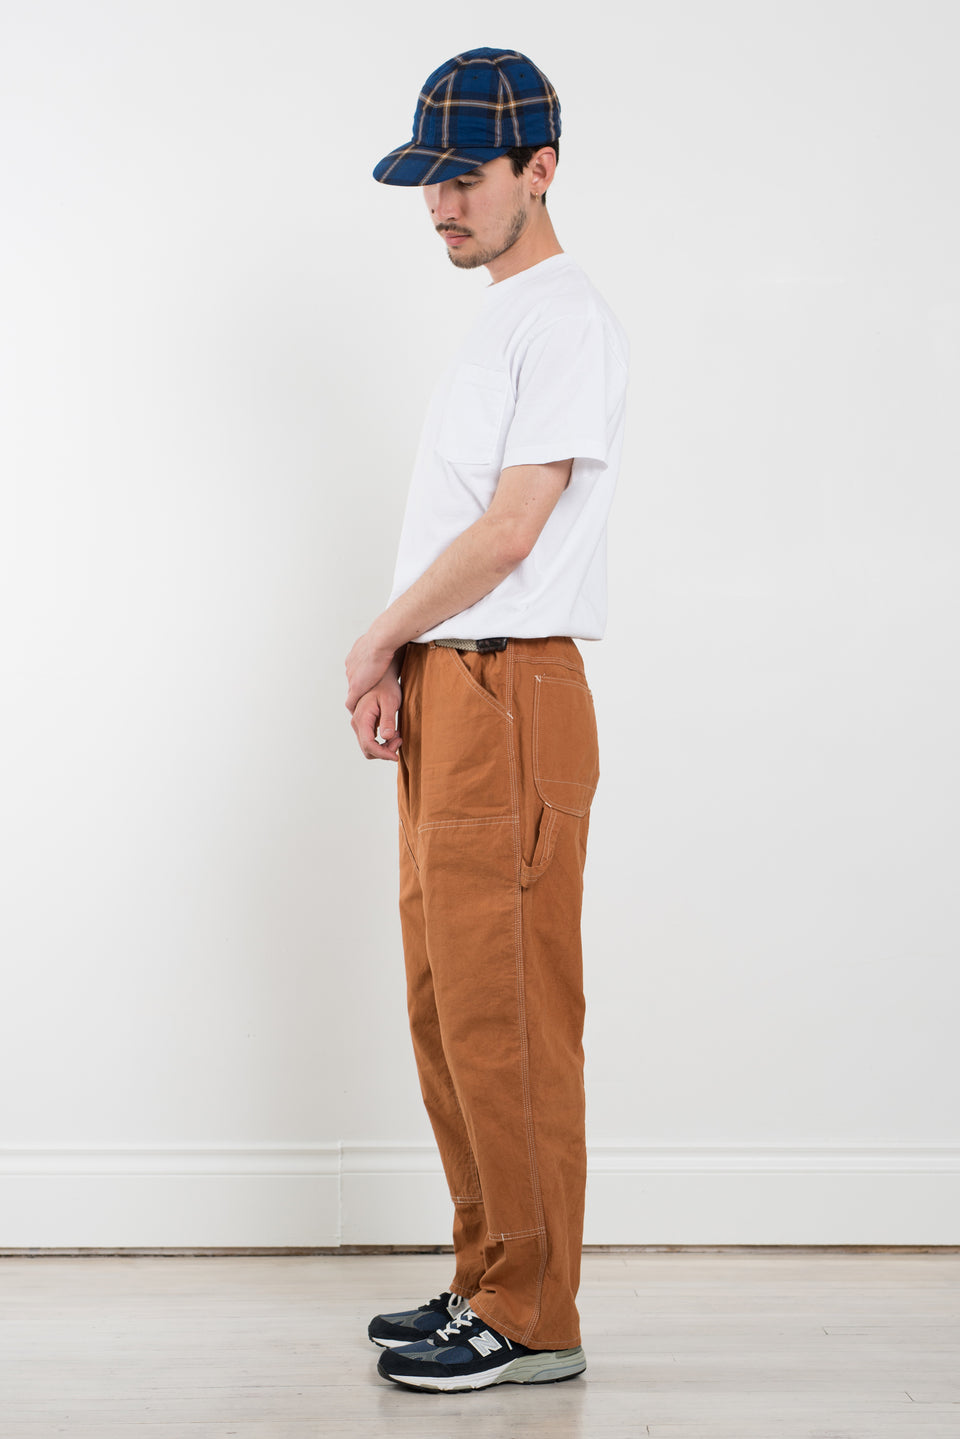 ENDS and MEANS SS22 EM221P02 Japan Double Knee Painter Pants Persimmon Calculus Victoria BC Canada